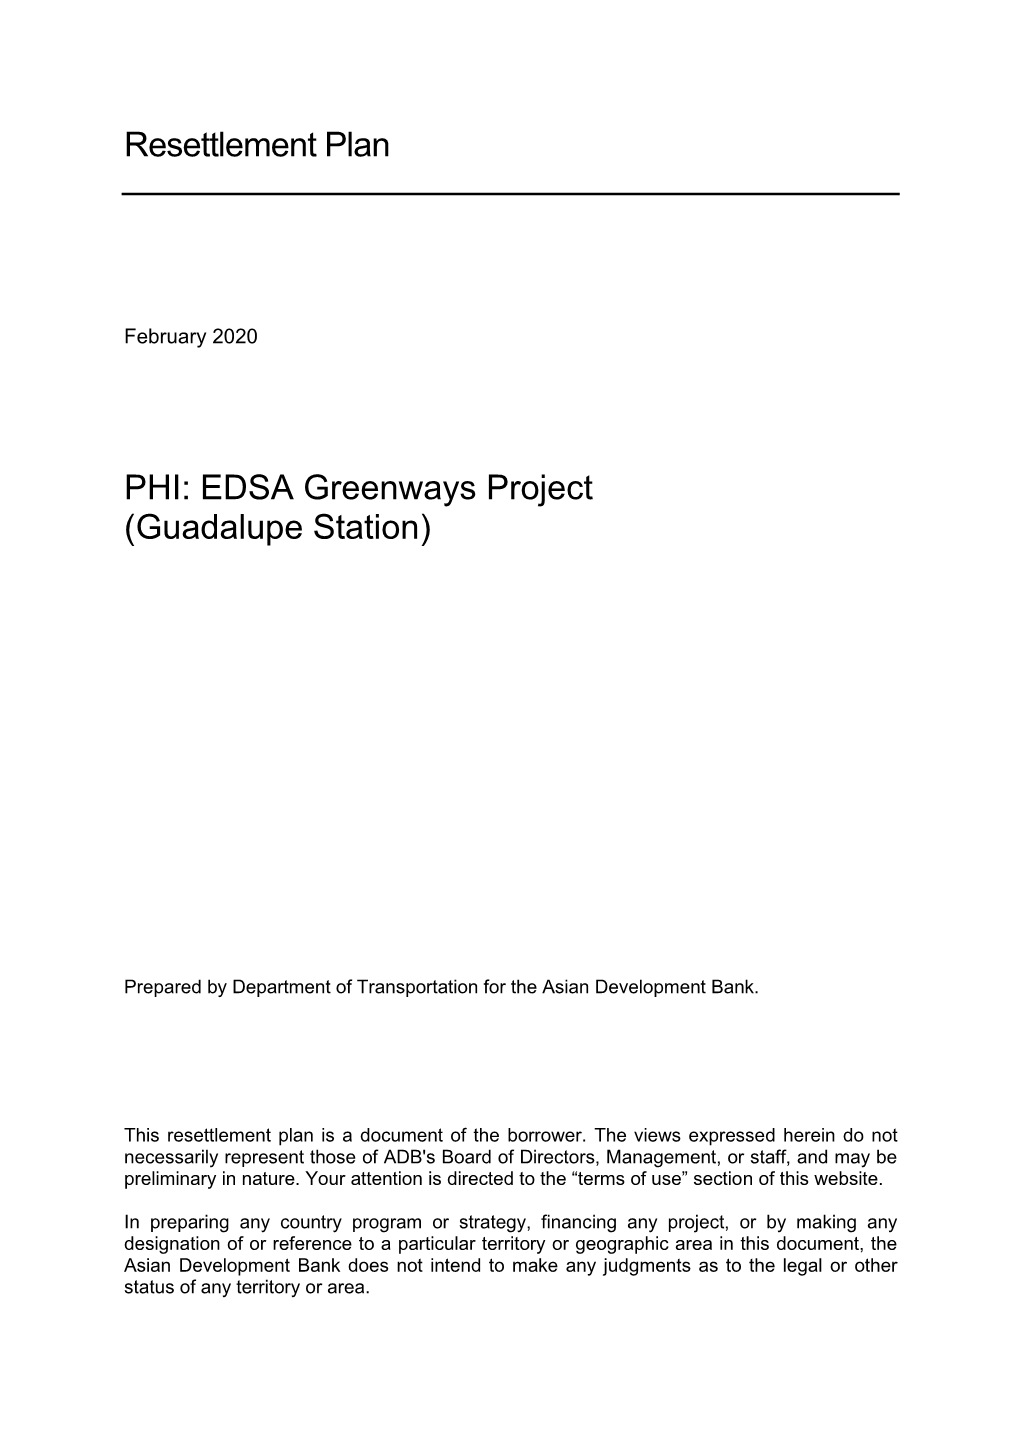 EDSA Greenways Project (Guadalupe Station)